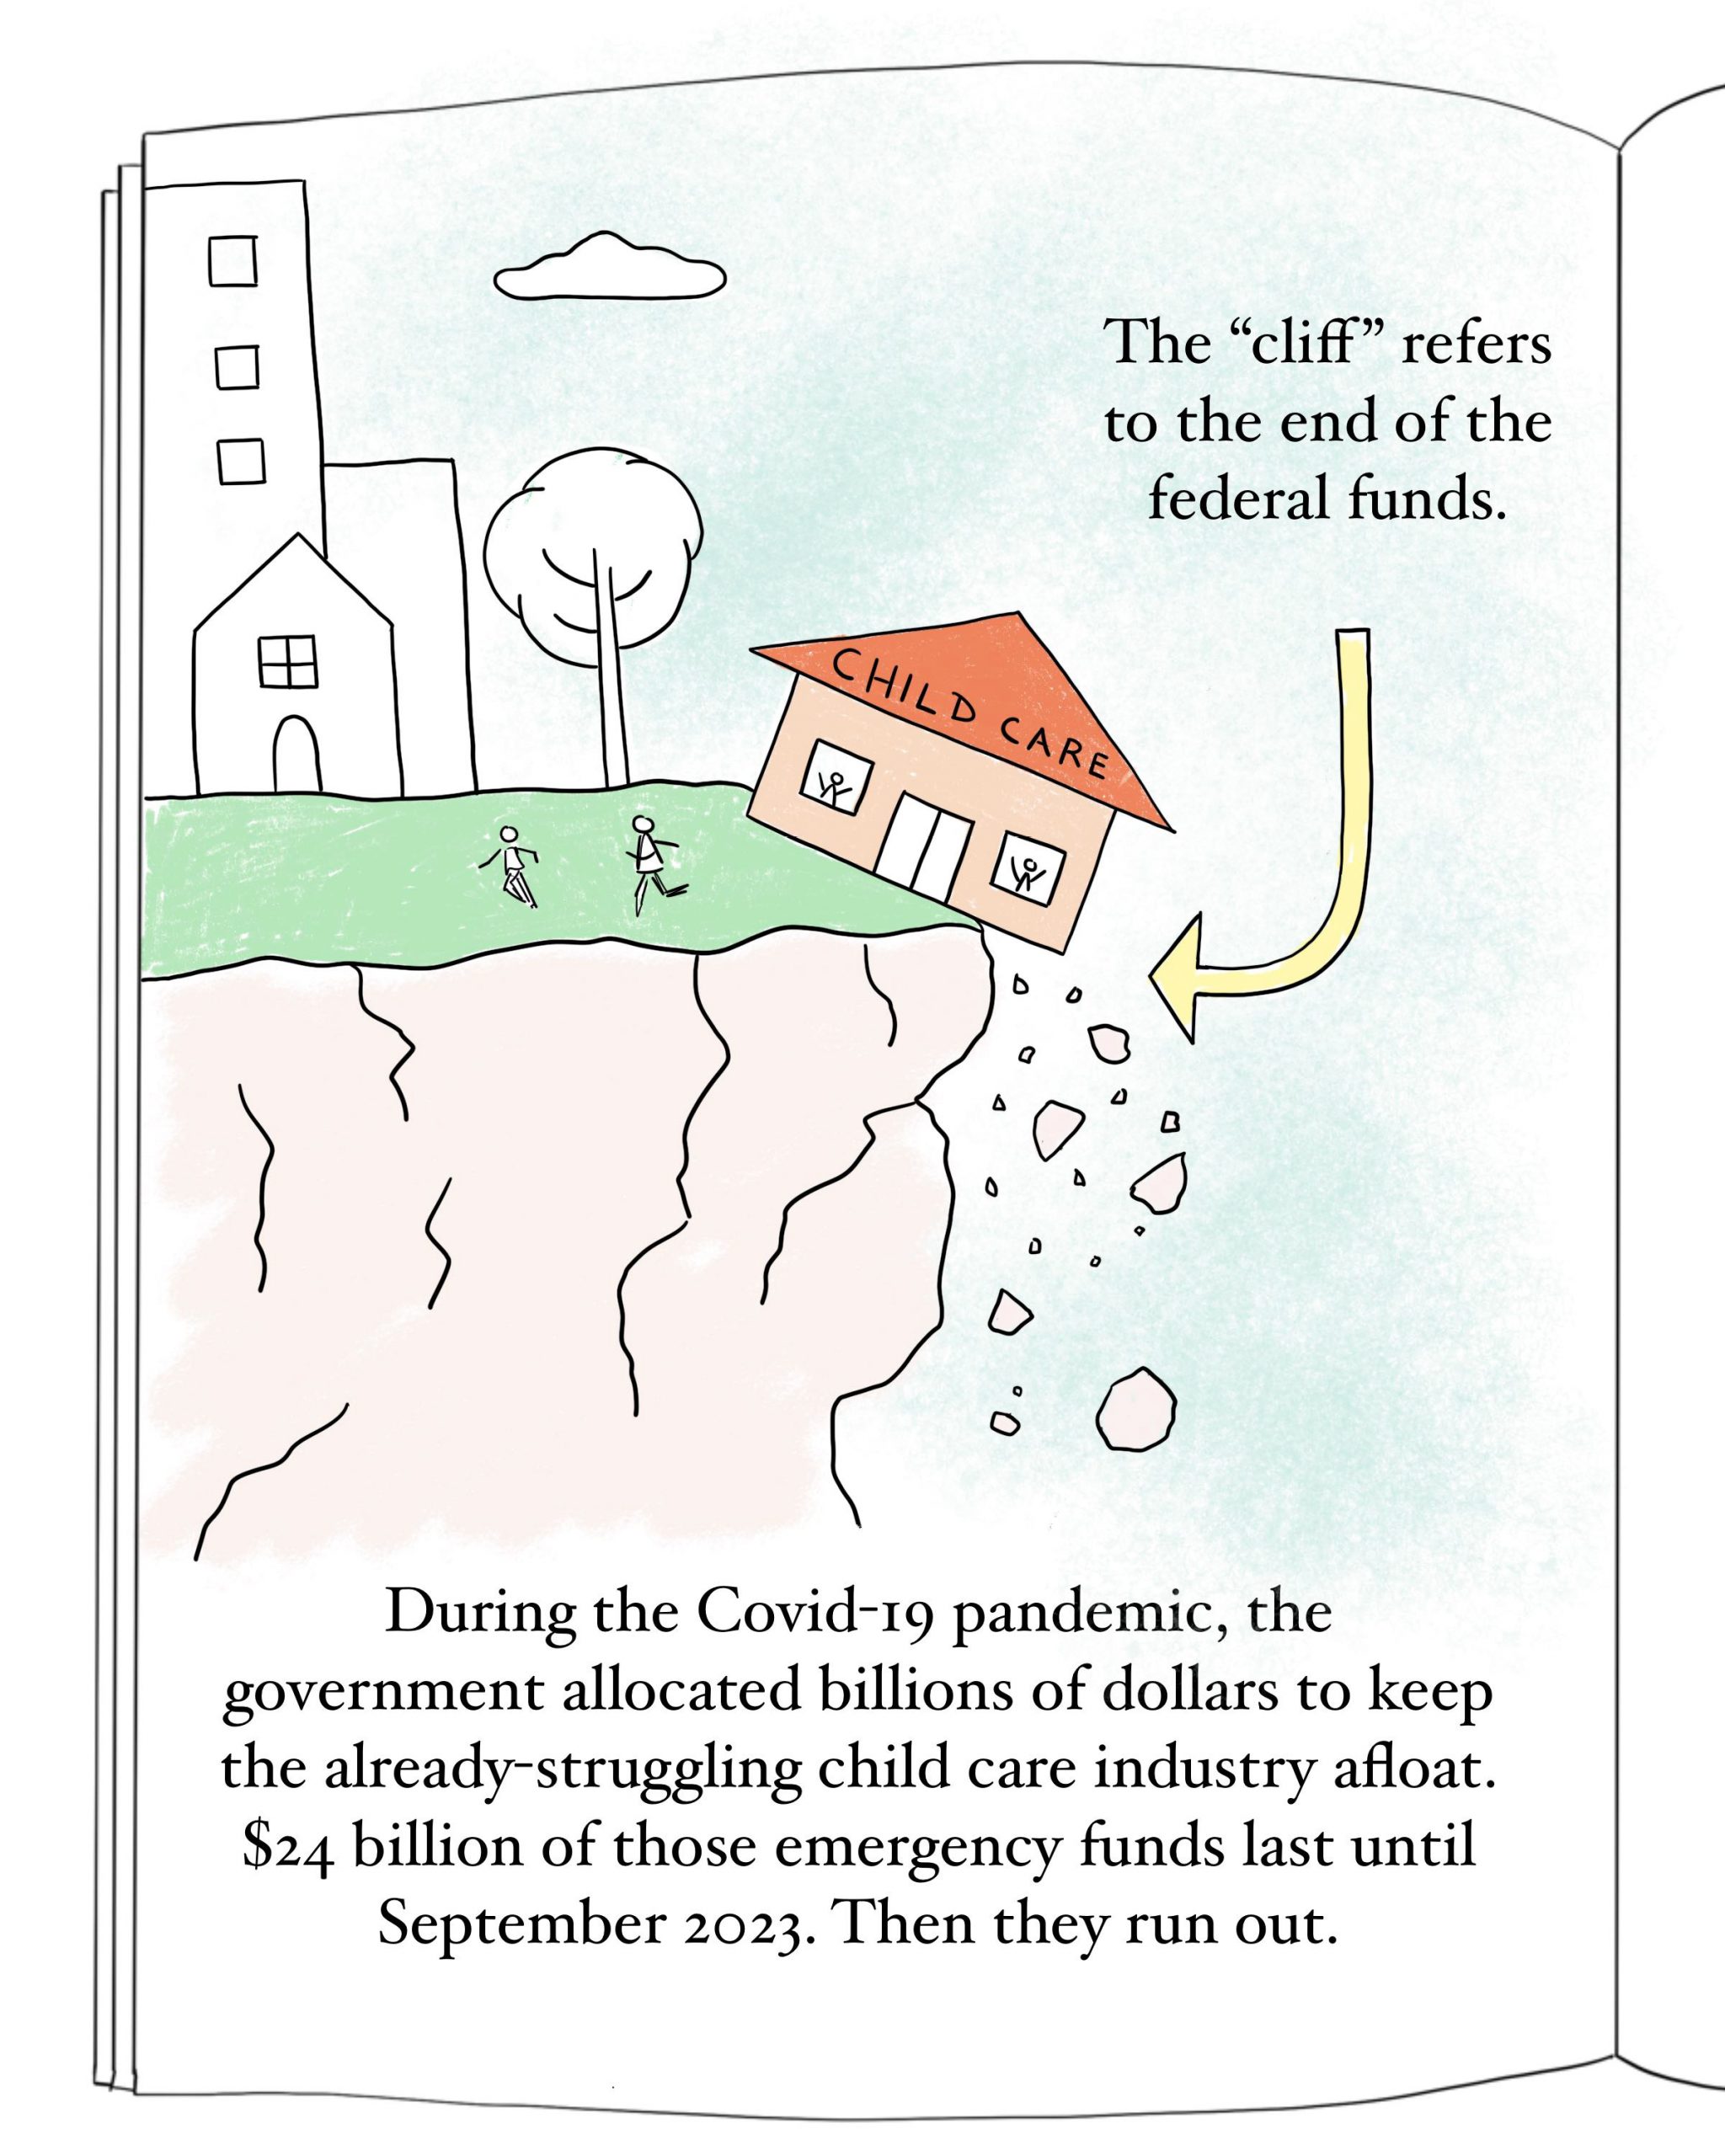 Picture of child care center falling off a cliff, as people run from it. The text reads:

The "cliff" refers to the end of the federal funds.

During the Covid-19 pandemic, the government allocated billions of dollars to keep
the already struggling child care industry afloat. $24 billion of those emergency funds last until September 2023. Then they run out.
